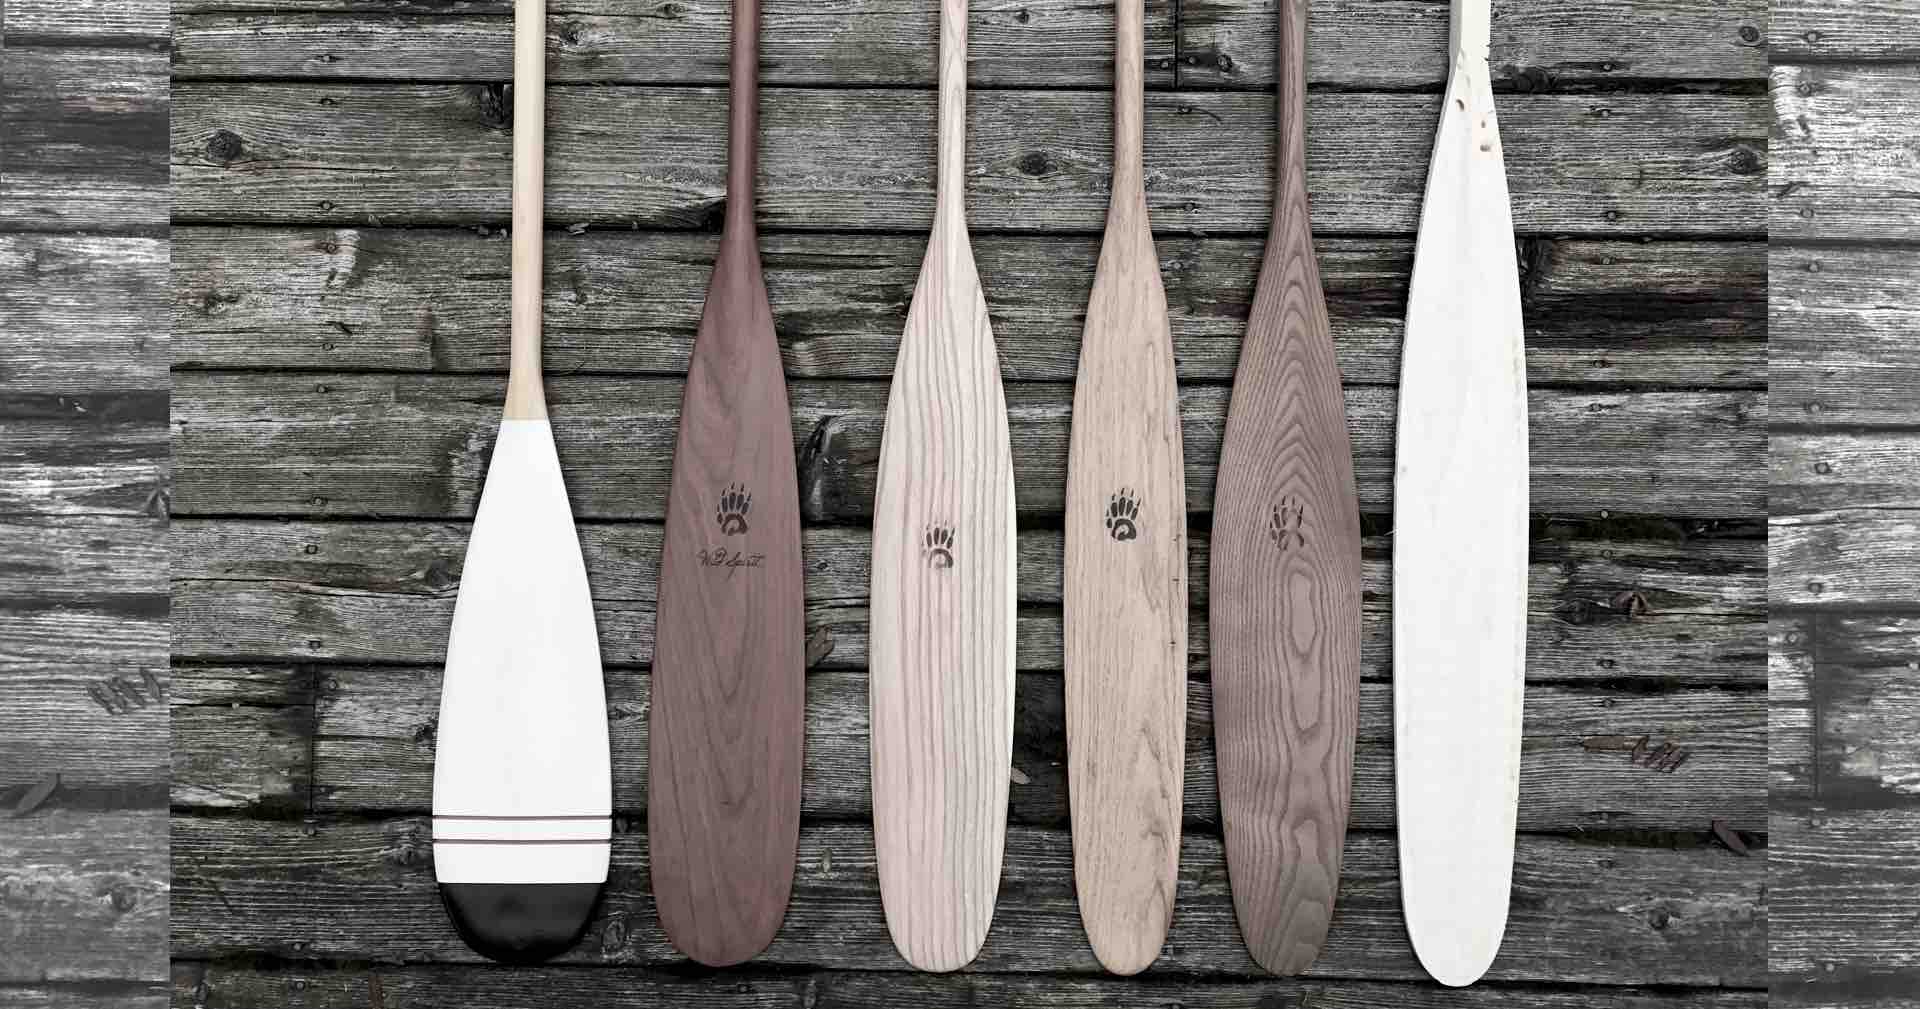 The full collection of all canoe paddle styles made by Badger Paddles